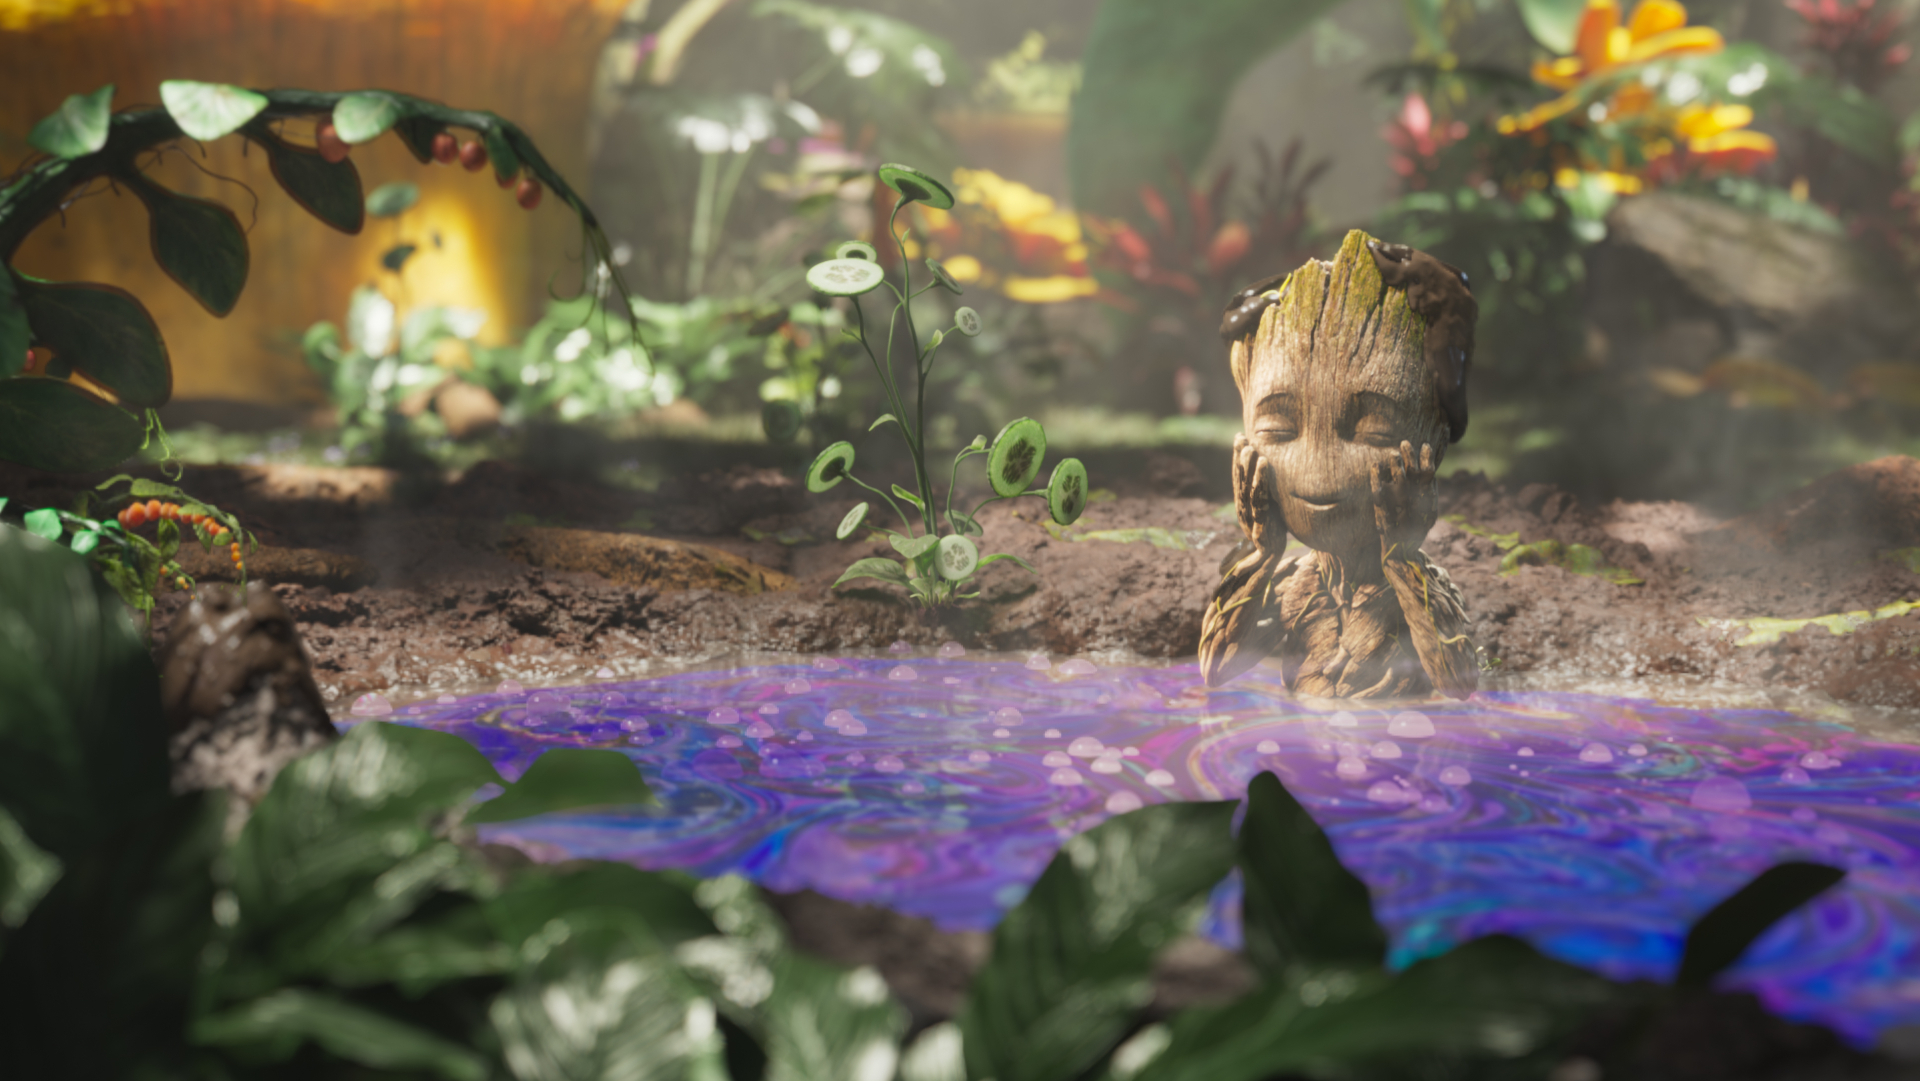 I Am Groot is taking over everyone's Disney Plus homepages